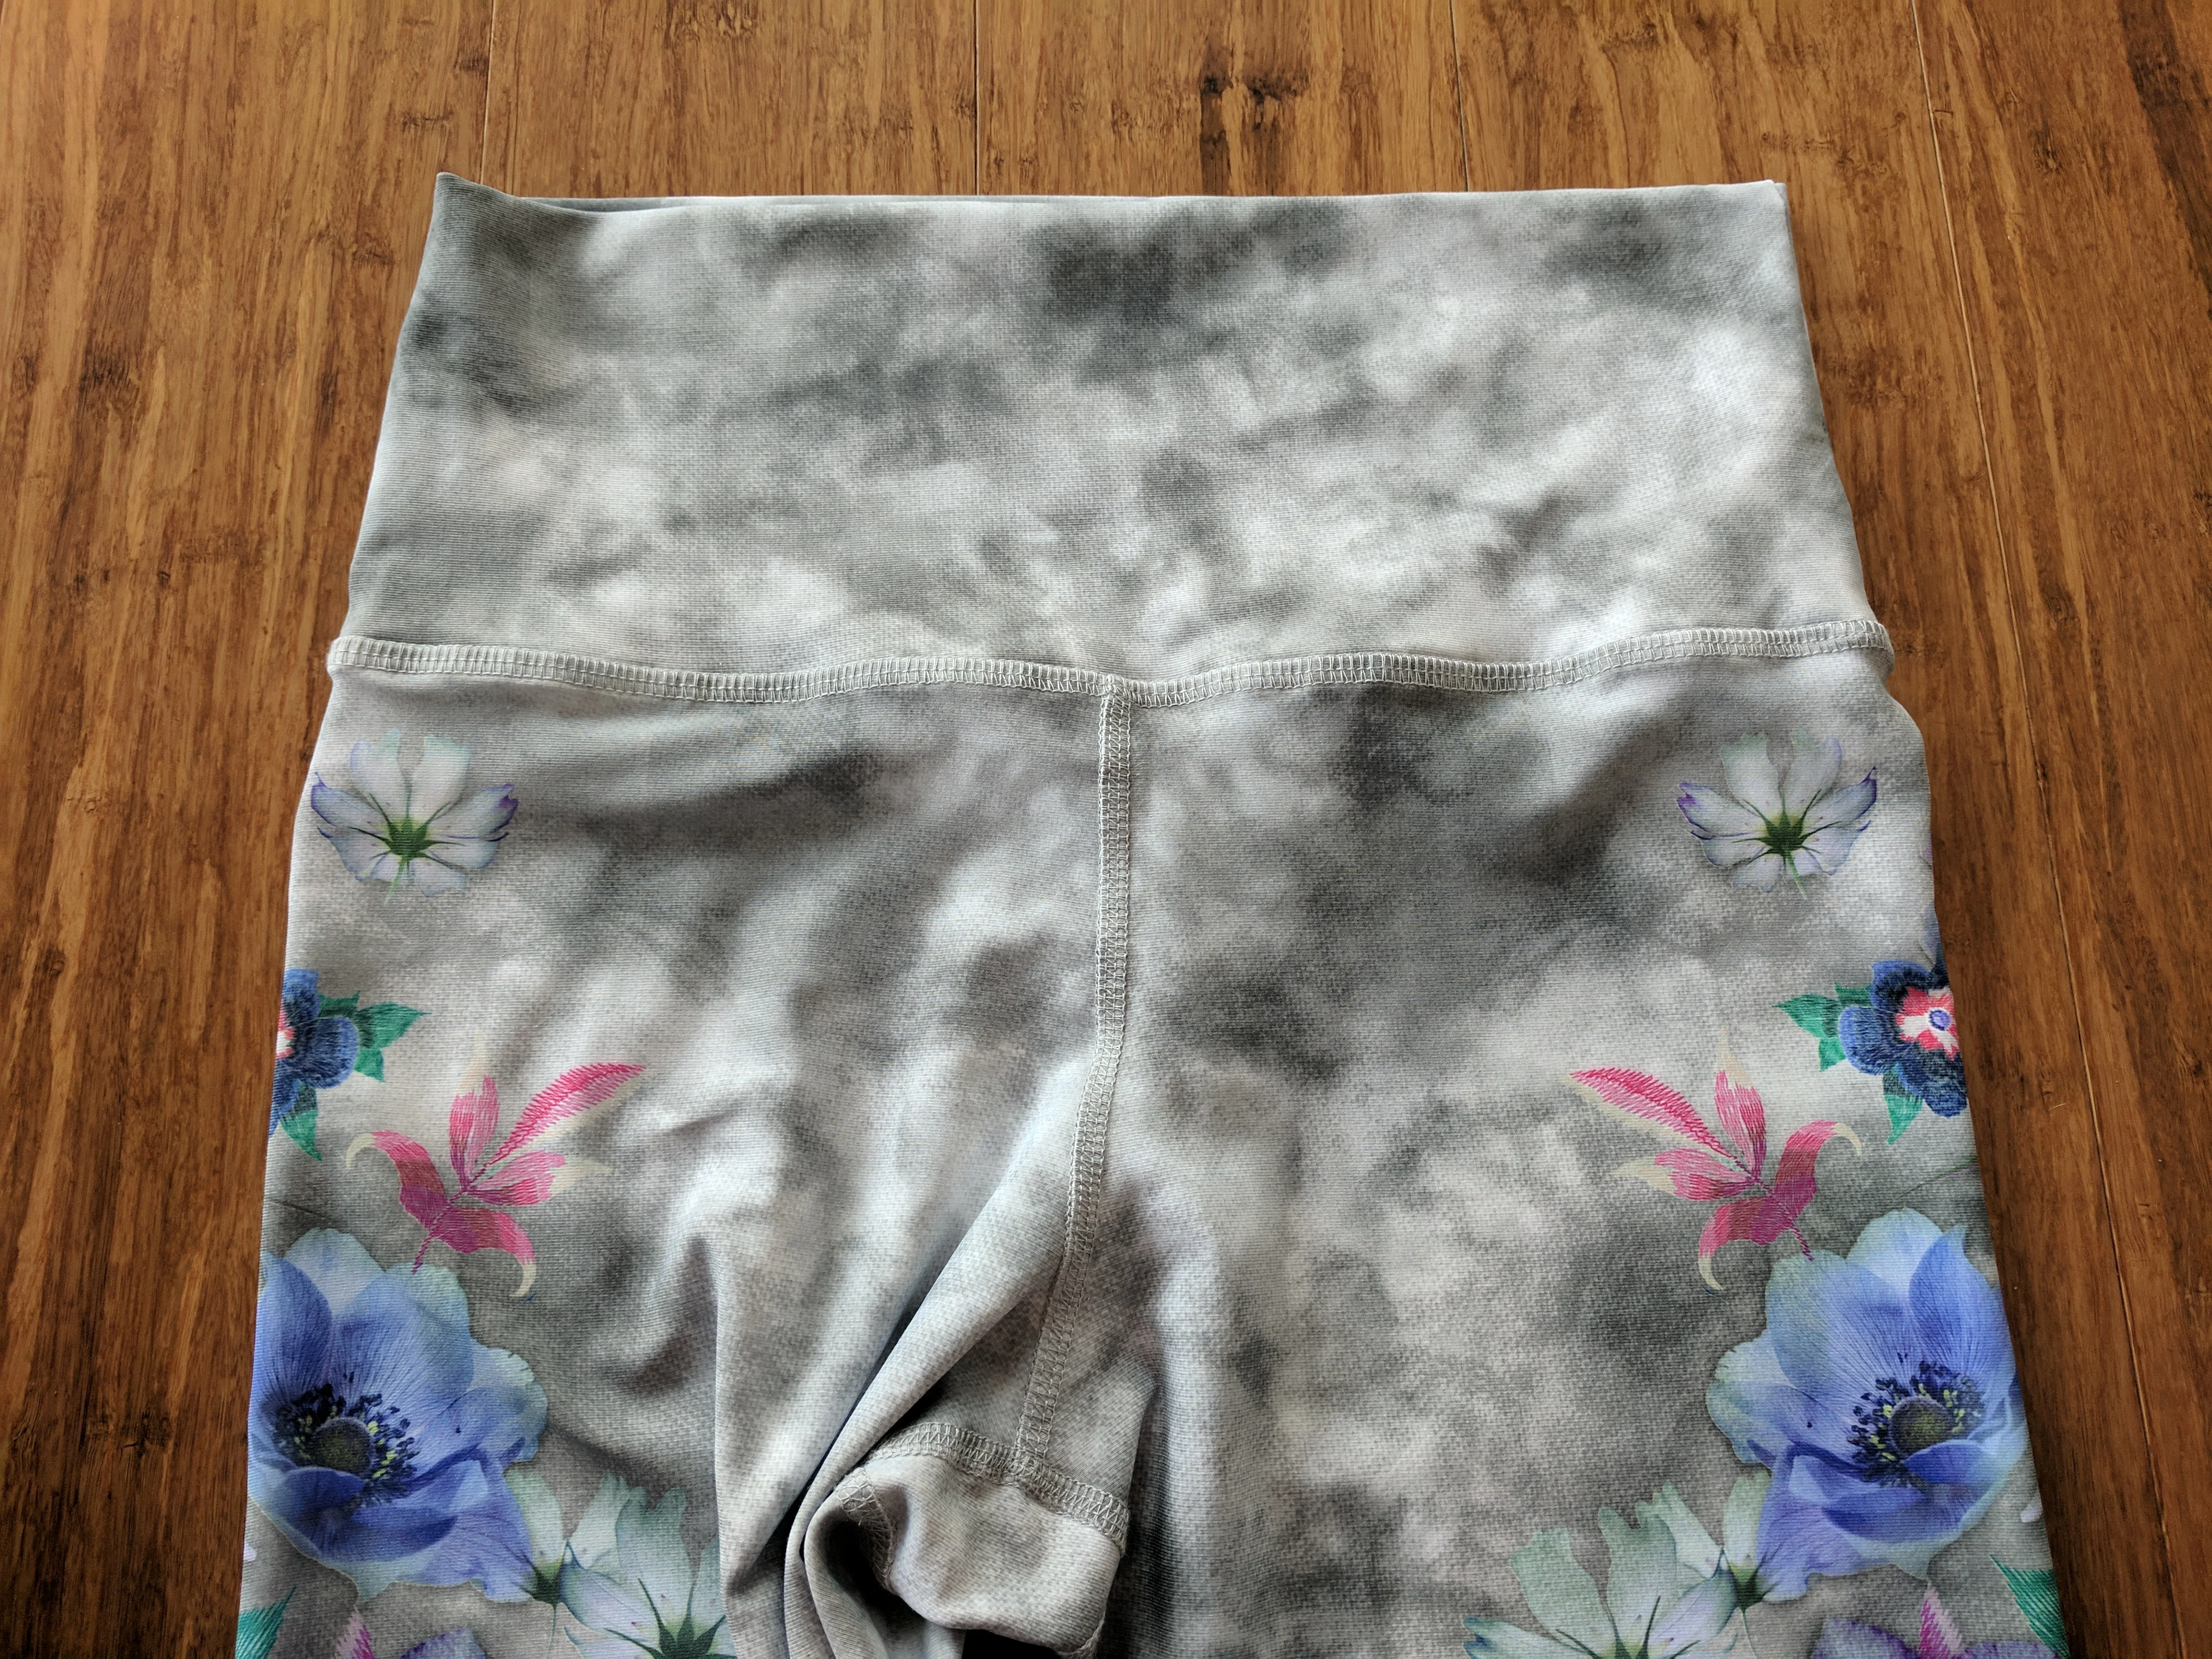 Evolution and creation Blue Tie Dye Printed Leggings Size Medium - $30 -  From Stephanie